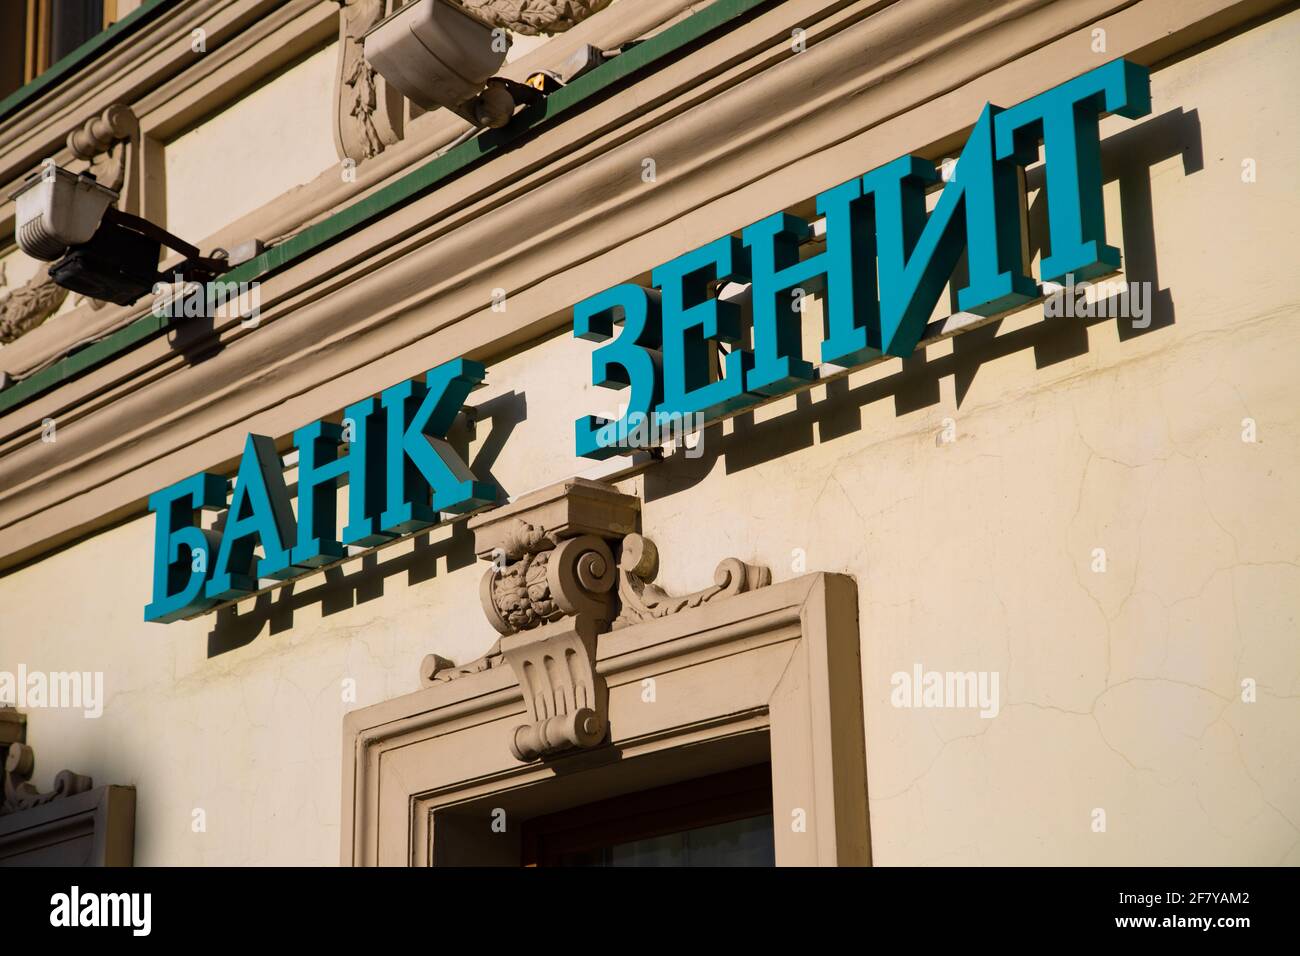 The Office of the Bank of zenith 2021 Stock Photo